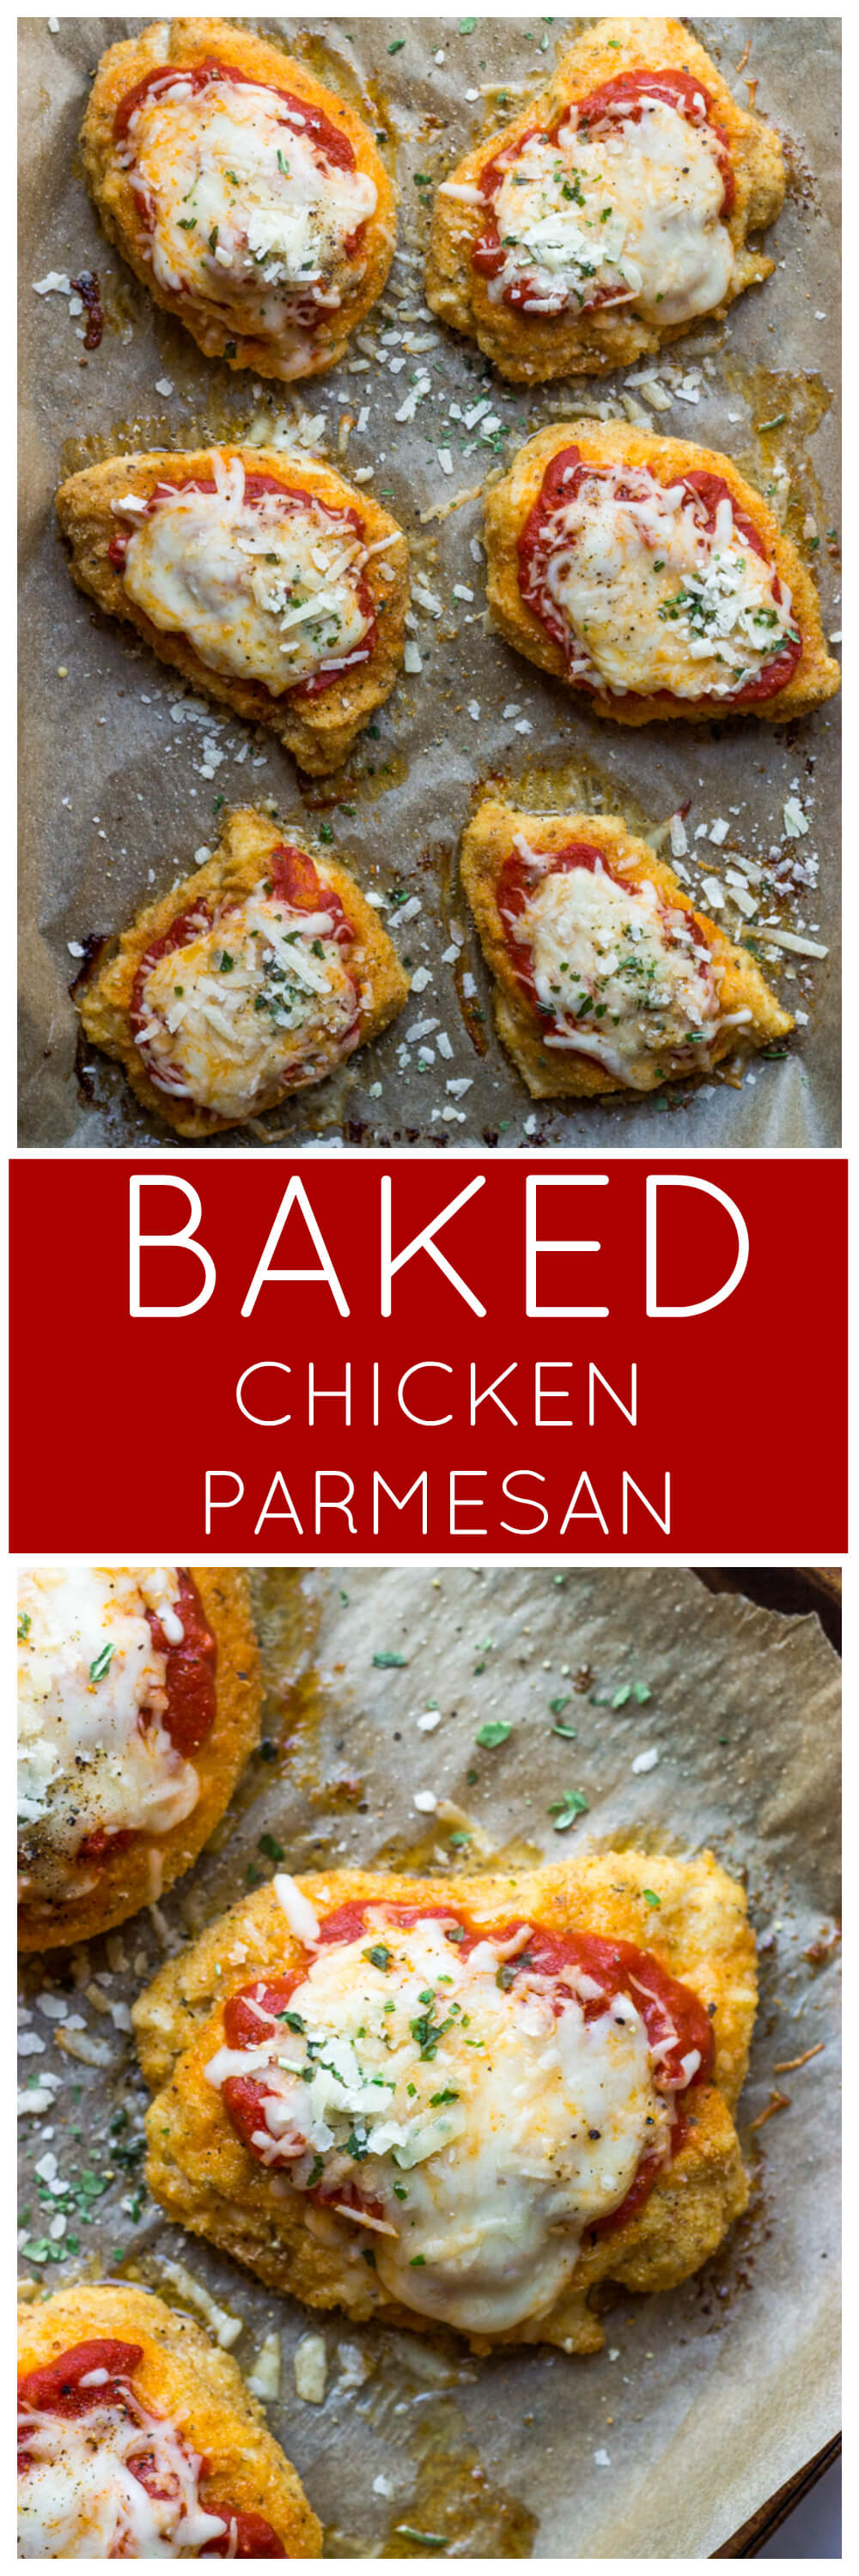 Baked Chicken Parmesan - lightly breaded chicken breast topped with marinara sauce and cheese, then baked until tender crisp. It's healthy and quick to make! | littlebroken.com @littlebroken